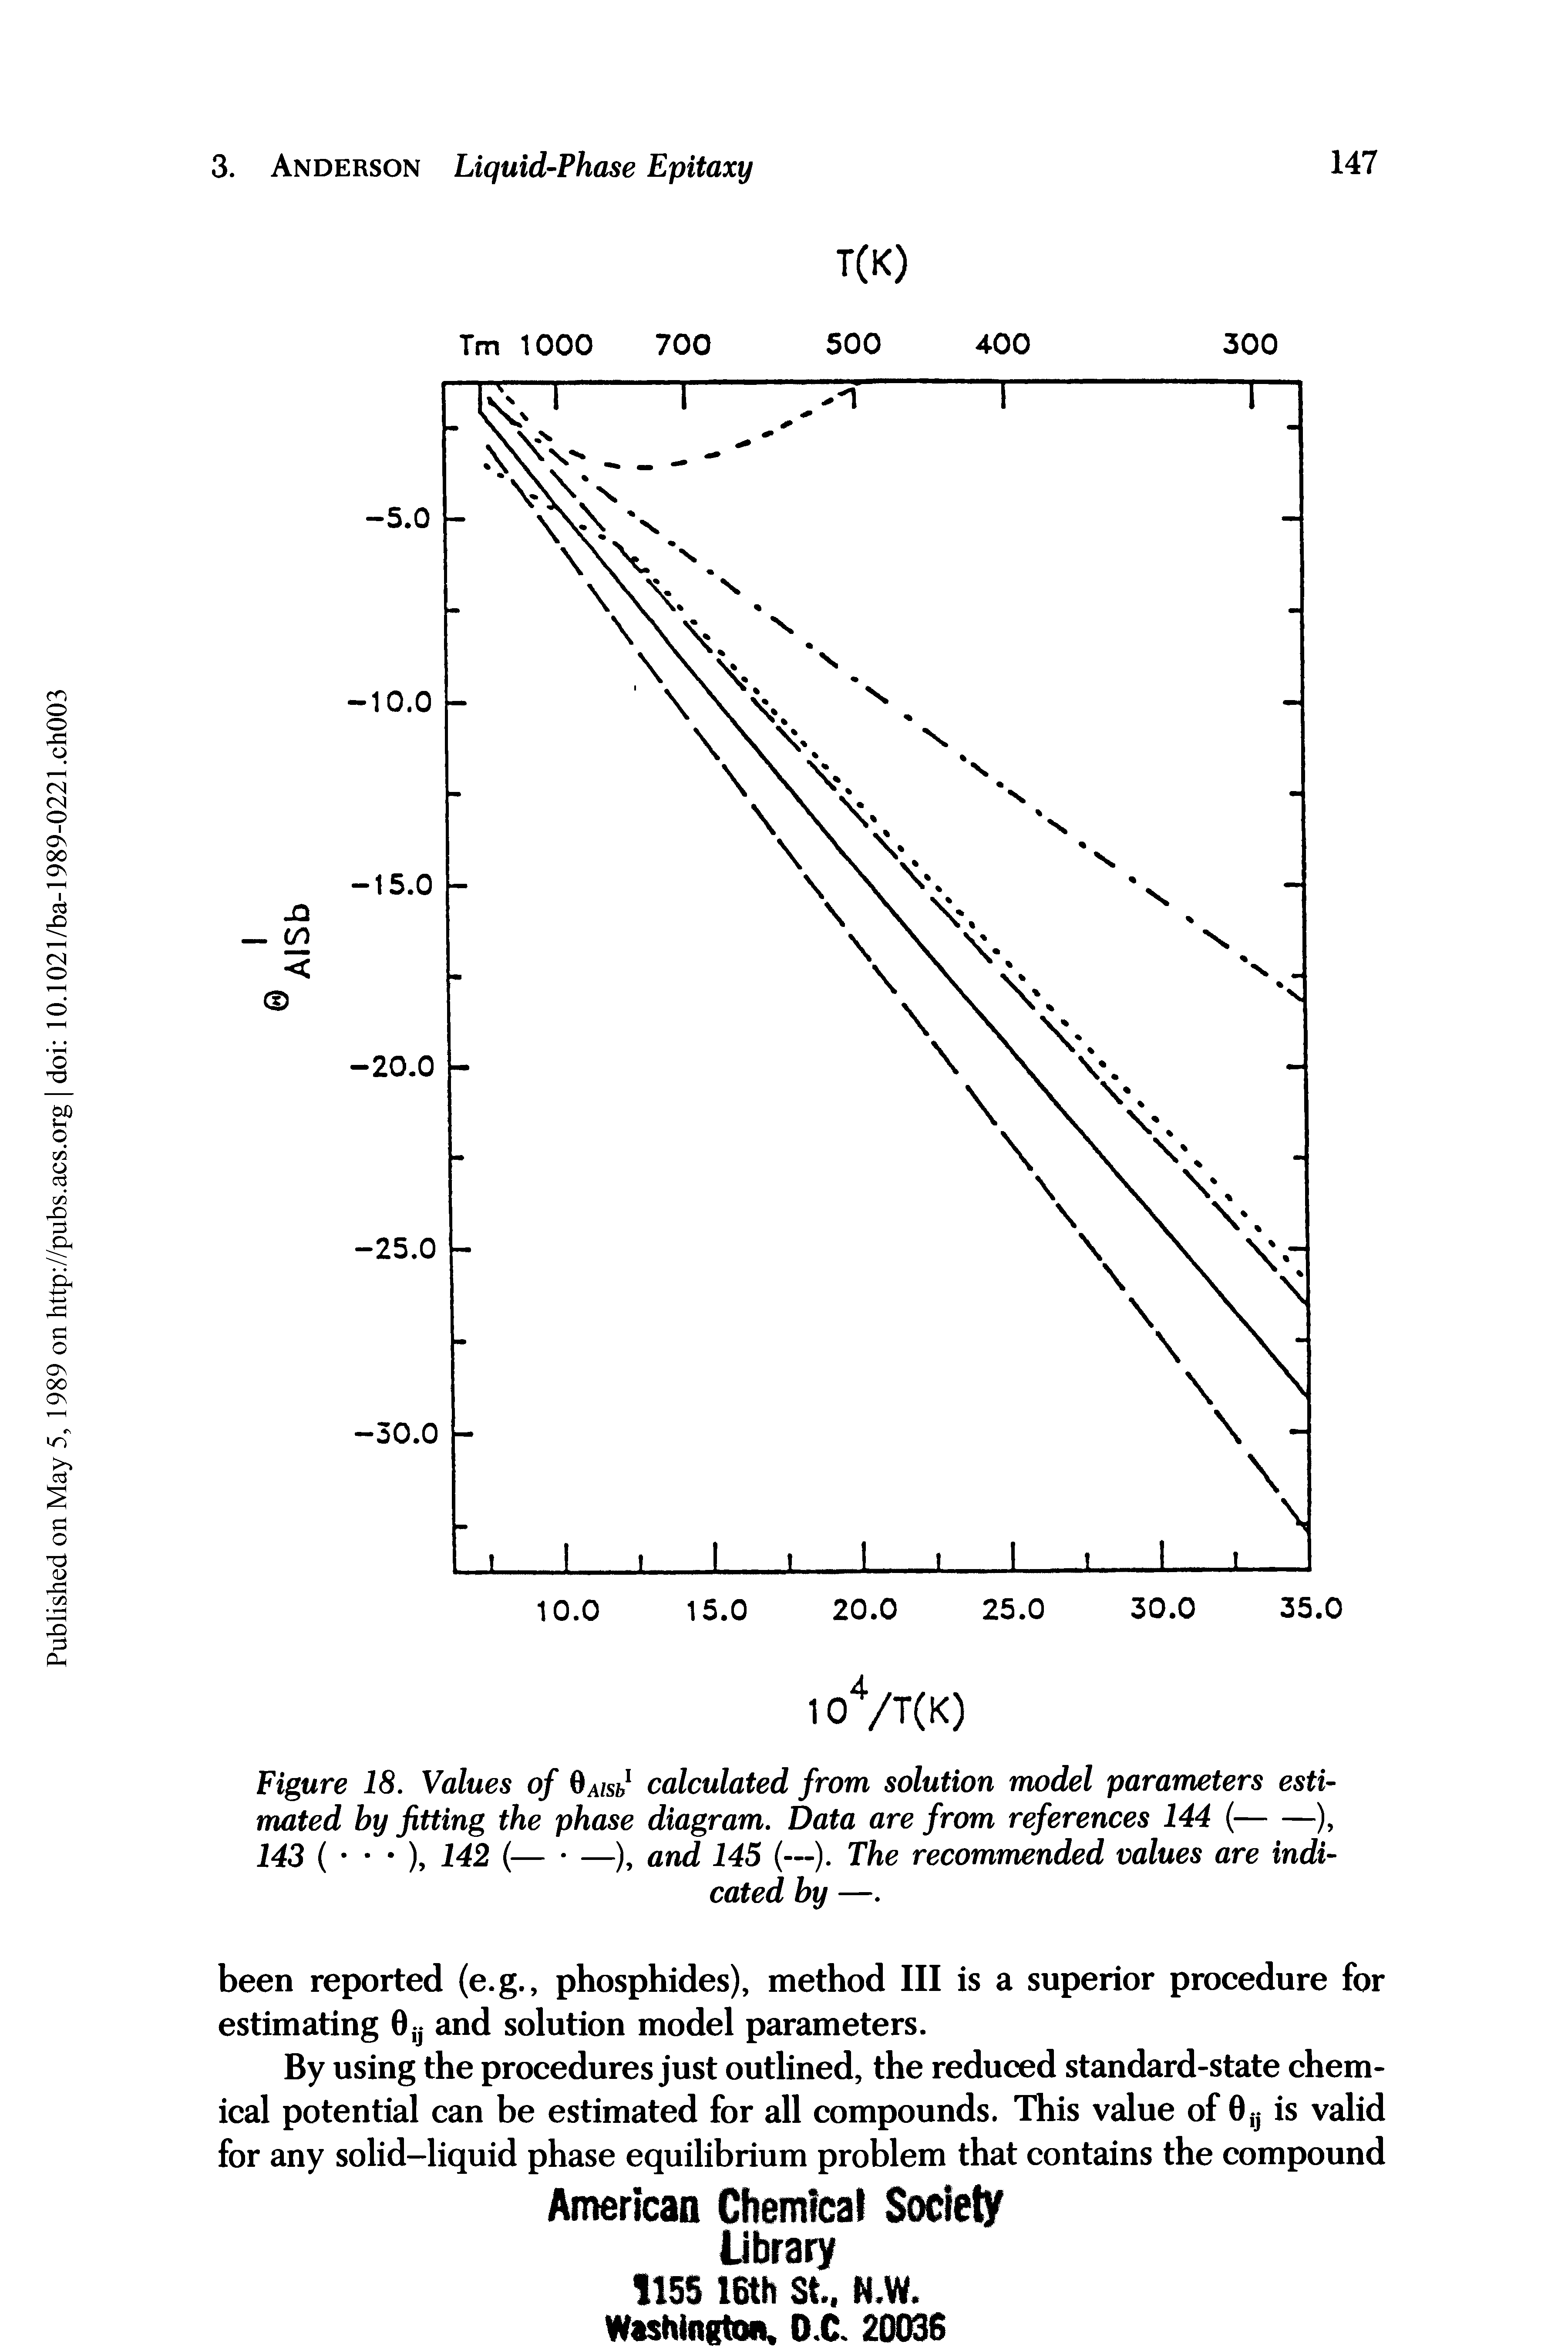 Figure 18. Values of Gazs, 1 calculated from solution model parameters estimated by fitting the phase diagram. Data are from references 144 (-),...